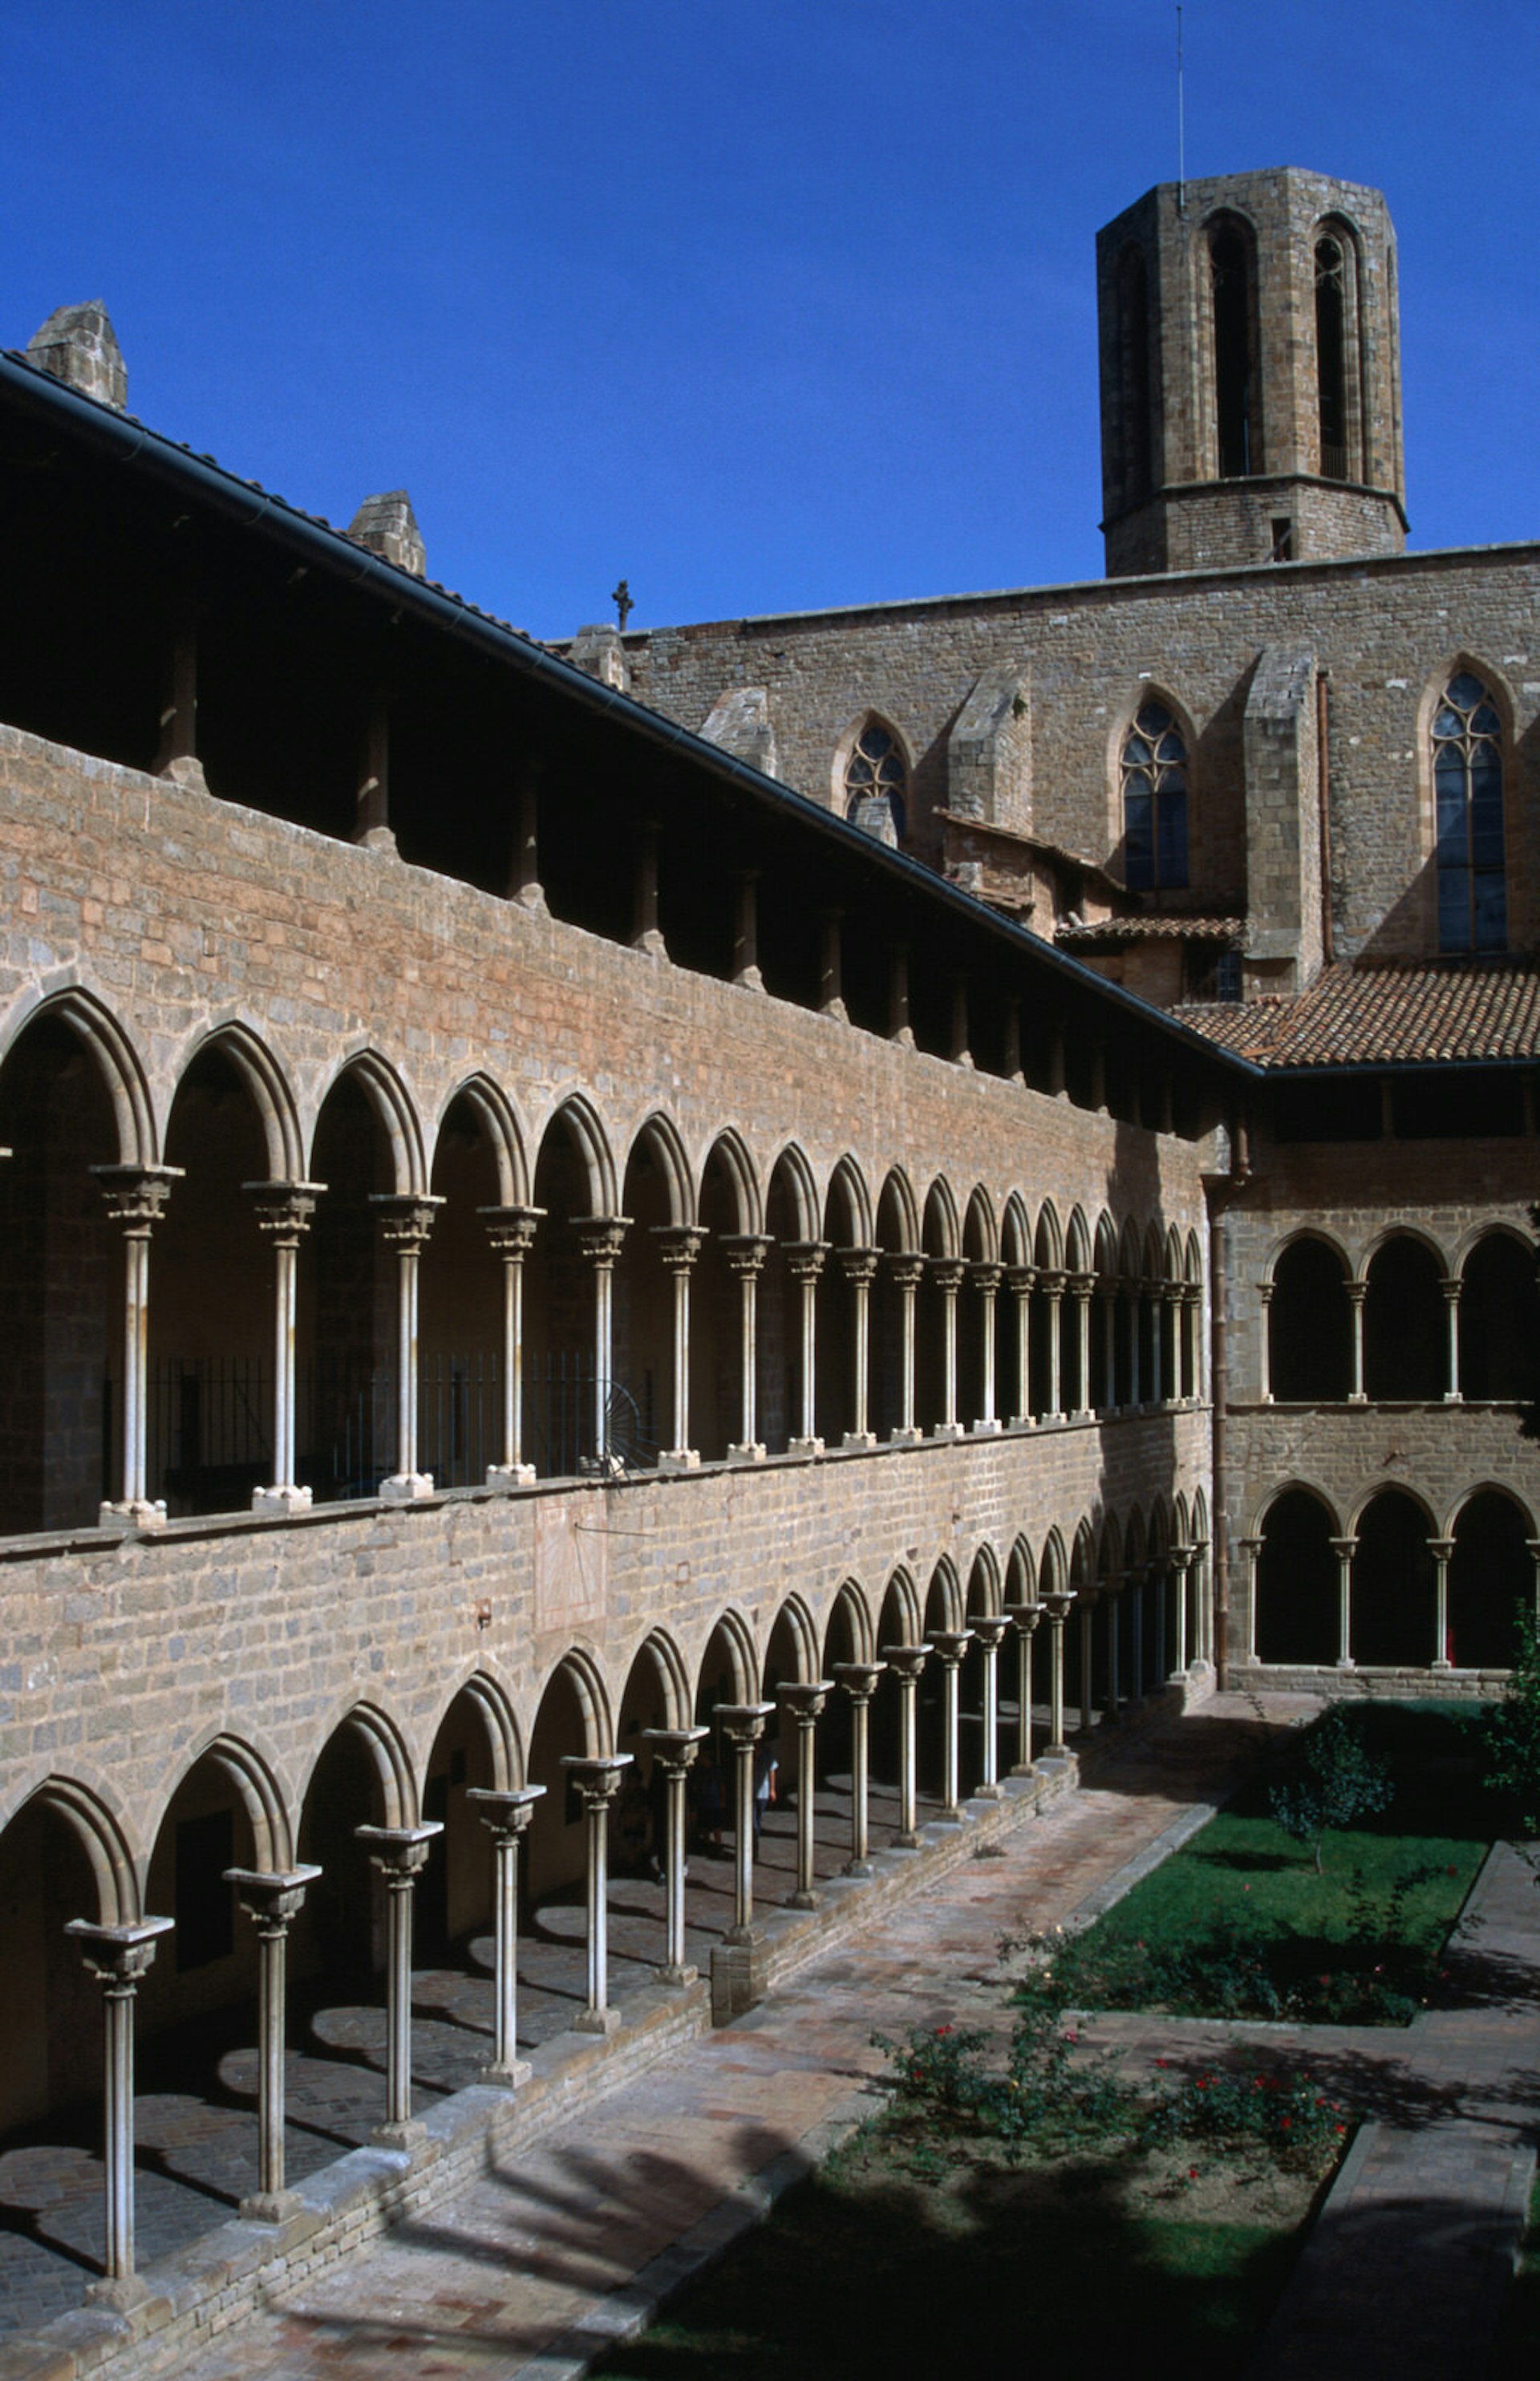 The cloisters of the 14th-century Museu-Monestir de Pedralbes © Martin Hughes / Lonely Planet